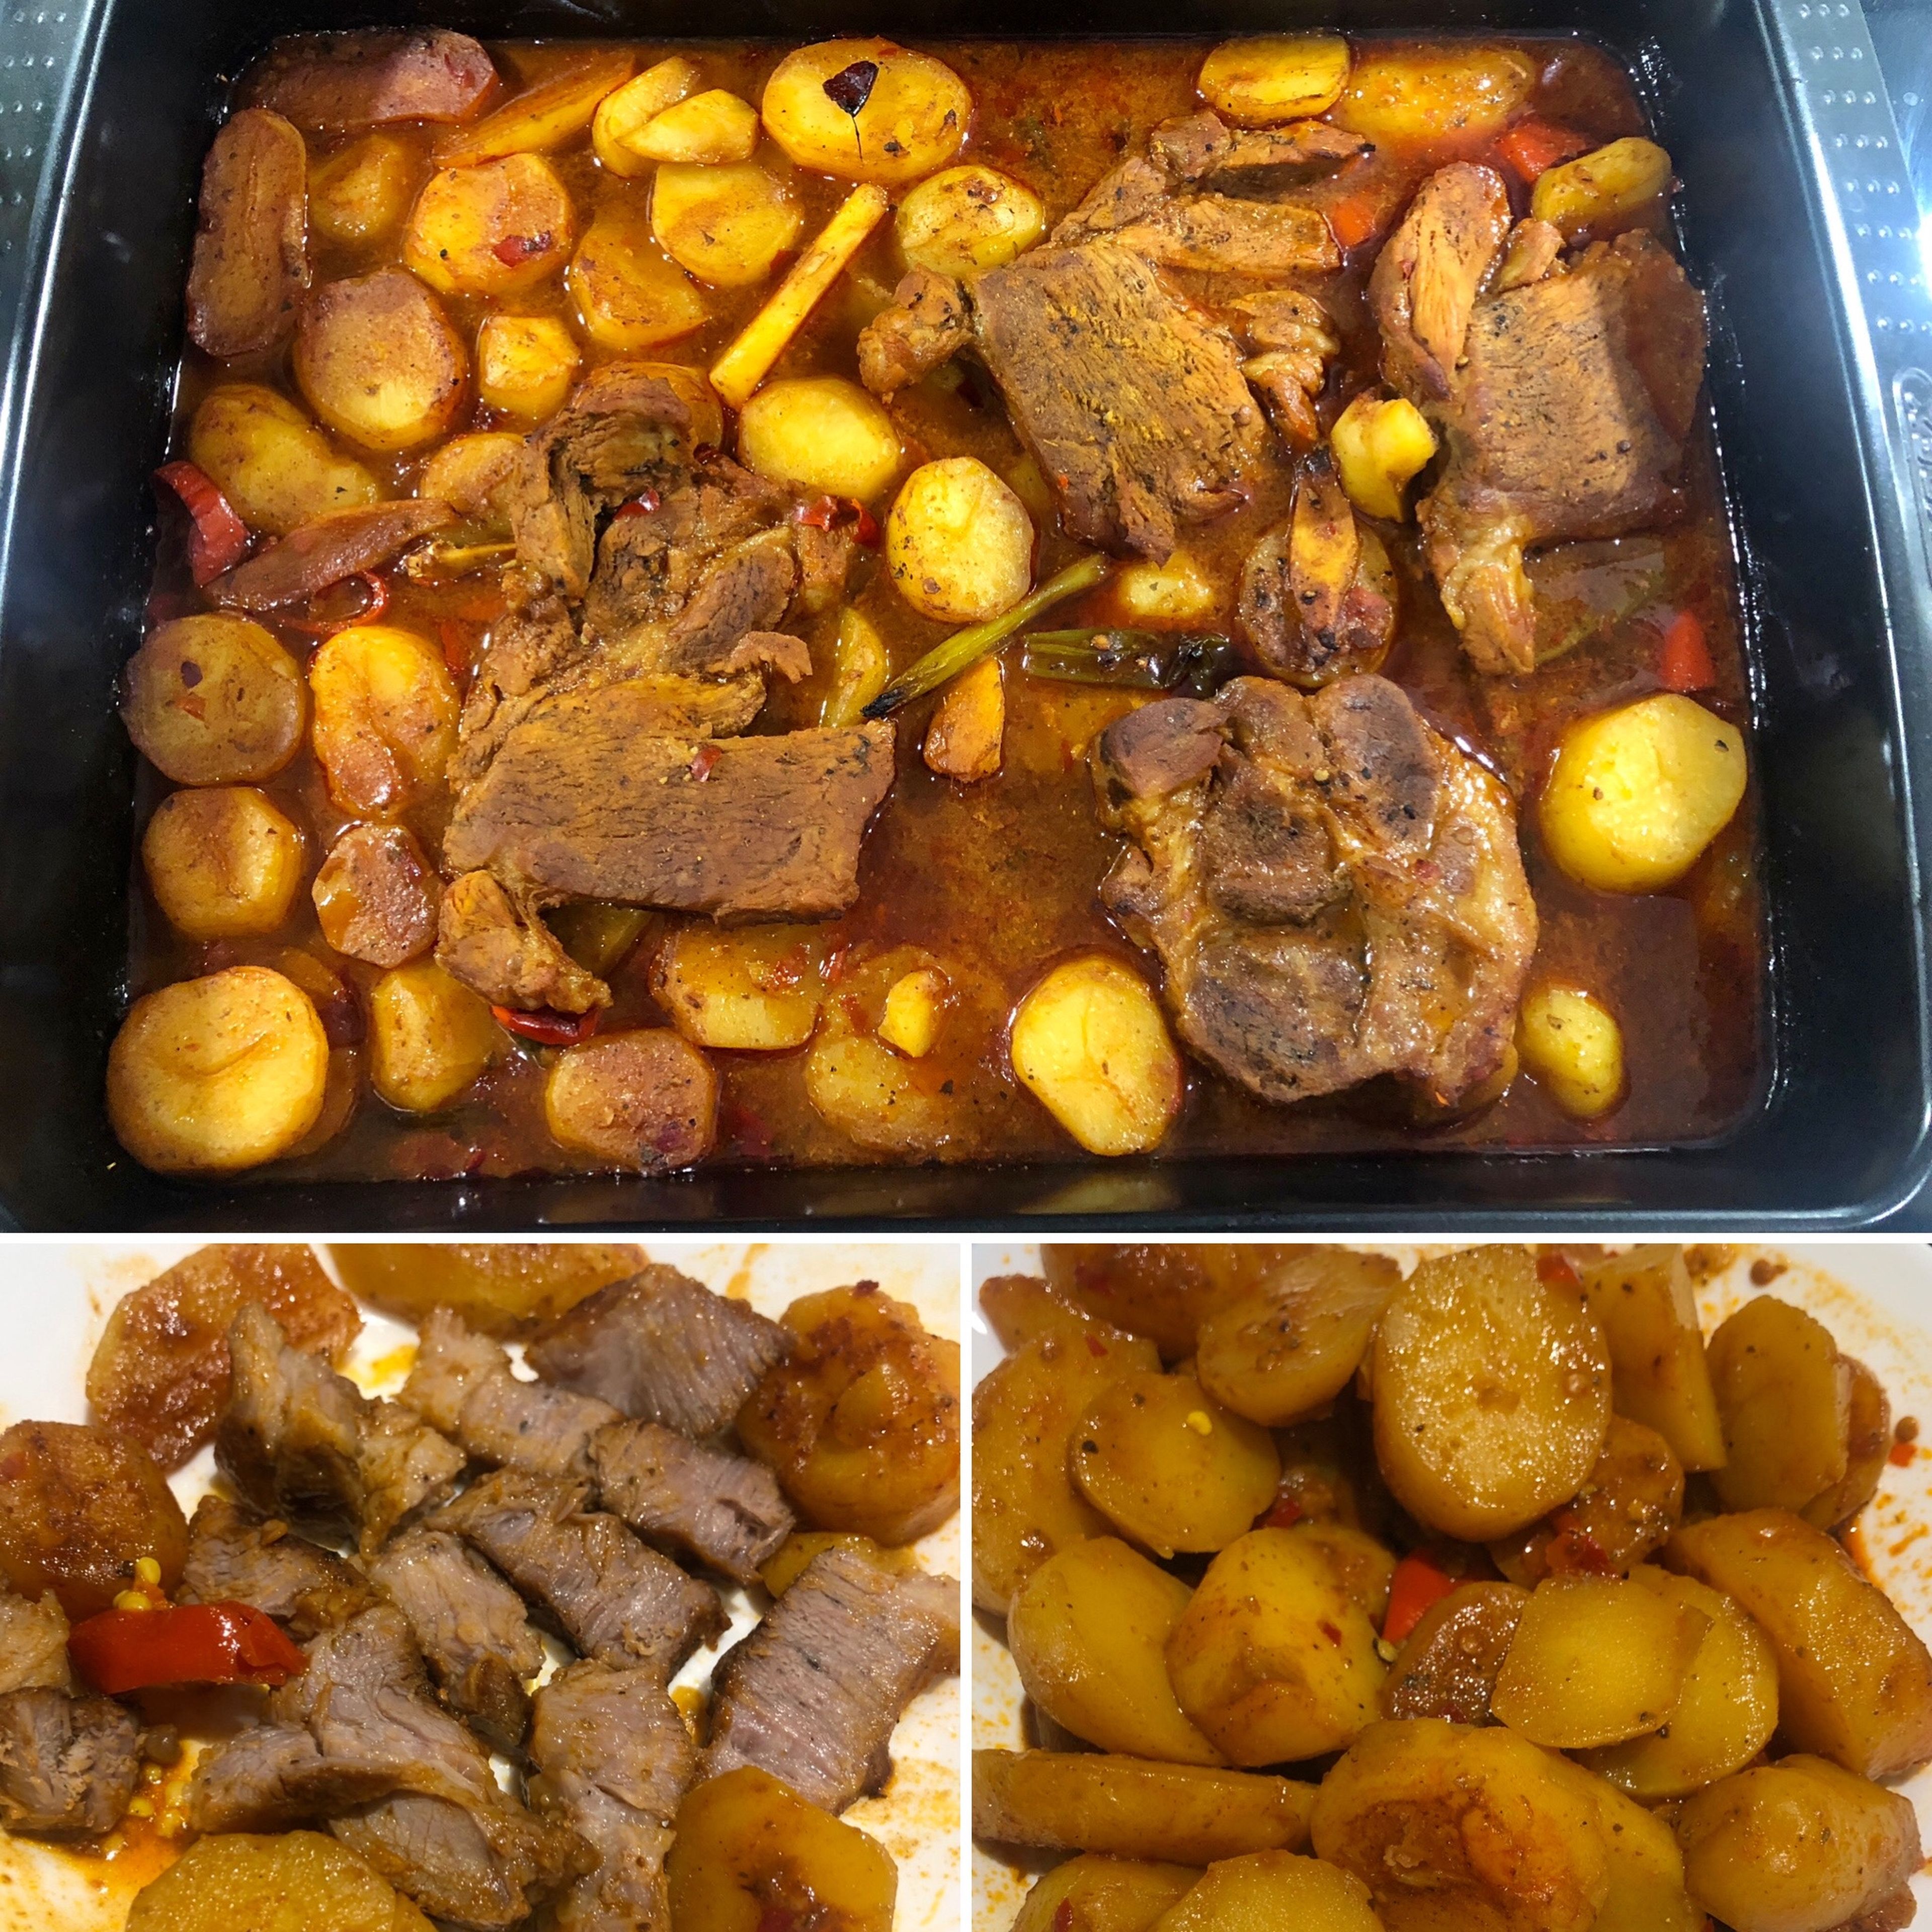 Take a deep oven pan, add marinated pork shoulders and potatoes. Roast everything in the oven for 45 mins at 190C. Rest for 15 mins then plate and serve.